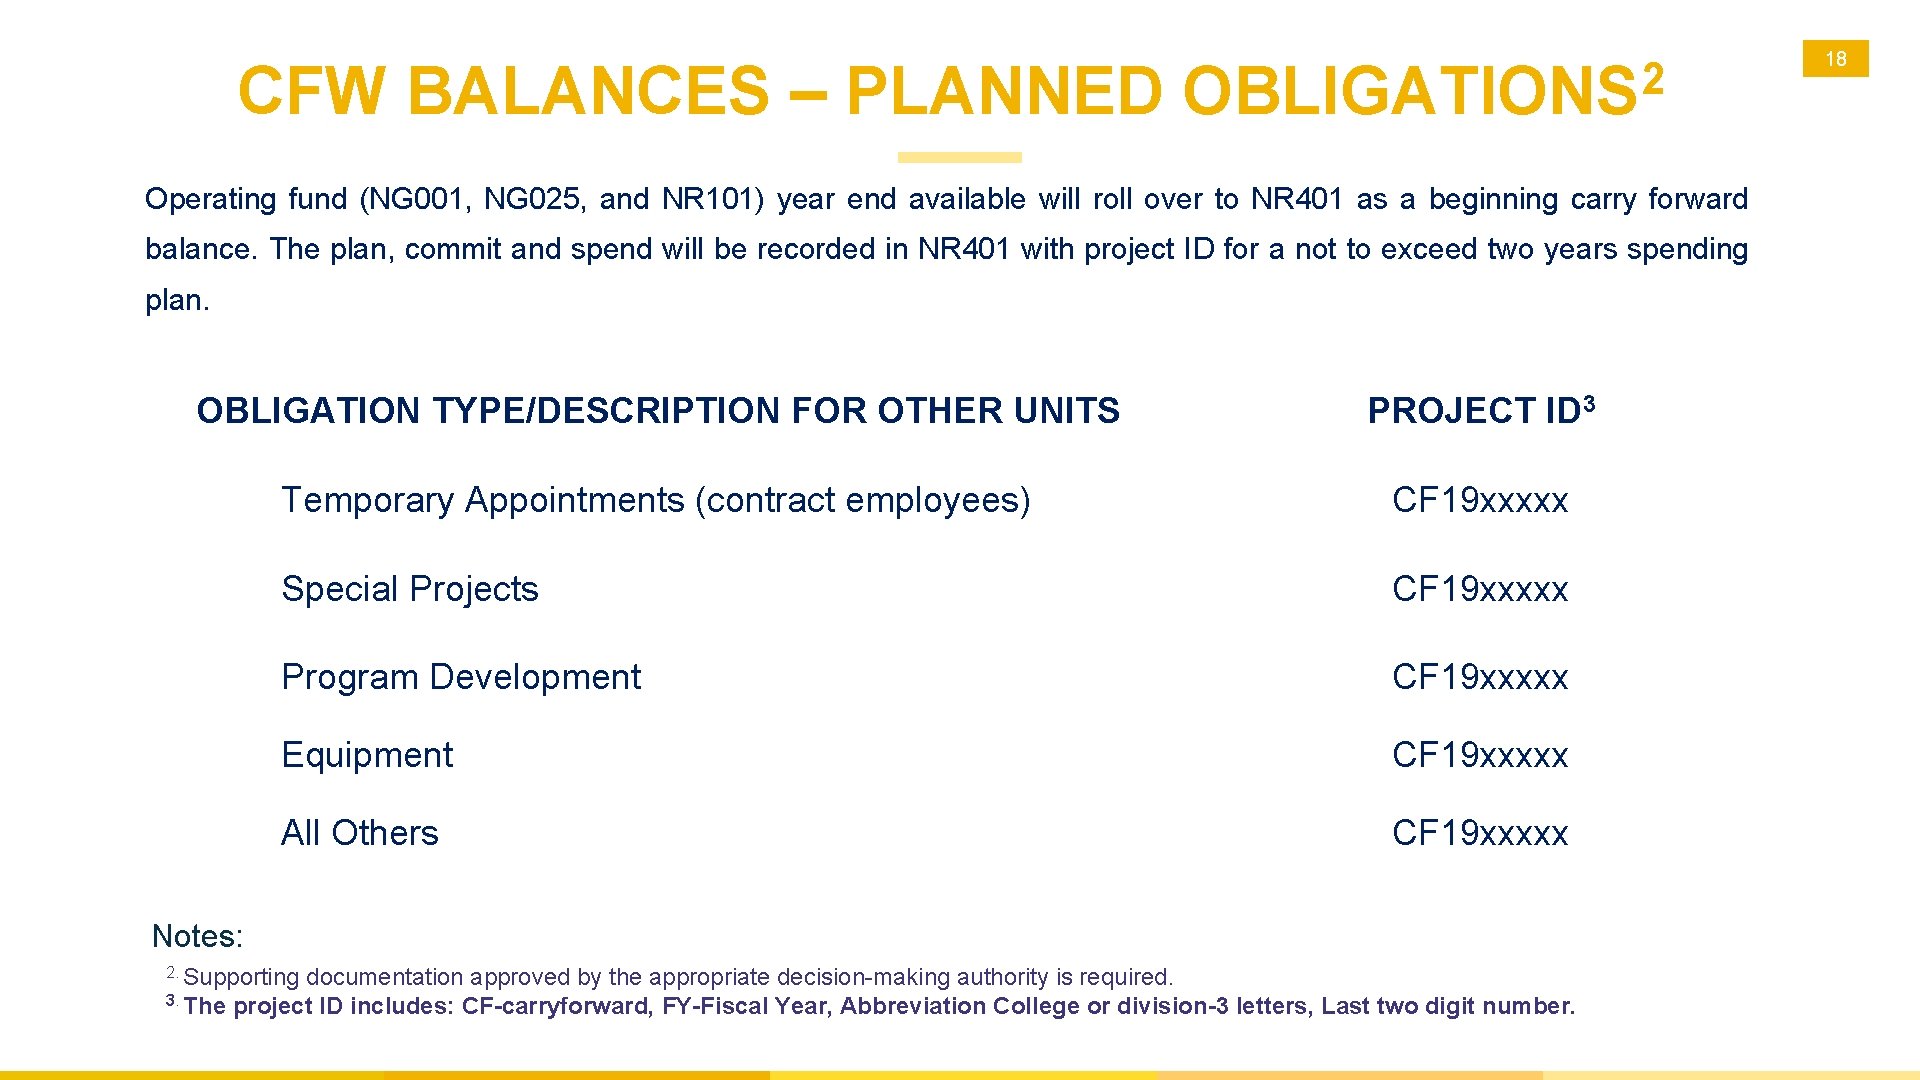 CFW BALANCES – PLANNED 2 OBLIGATIONS Operating fund (NG 001, NG 025, and NR